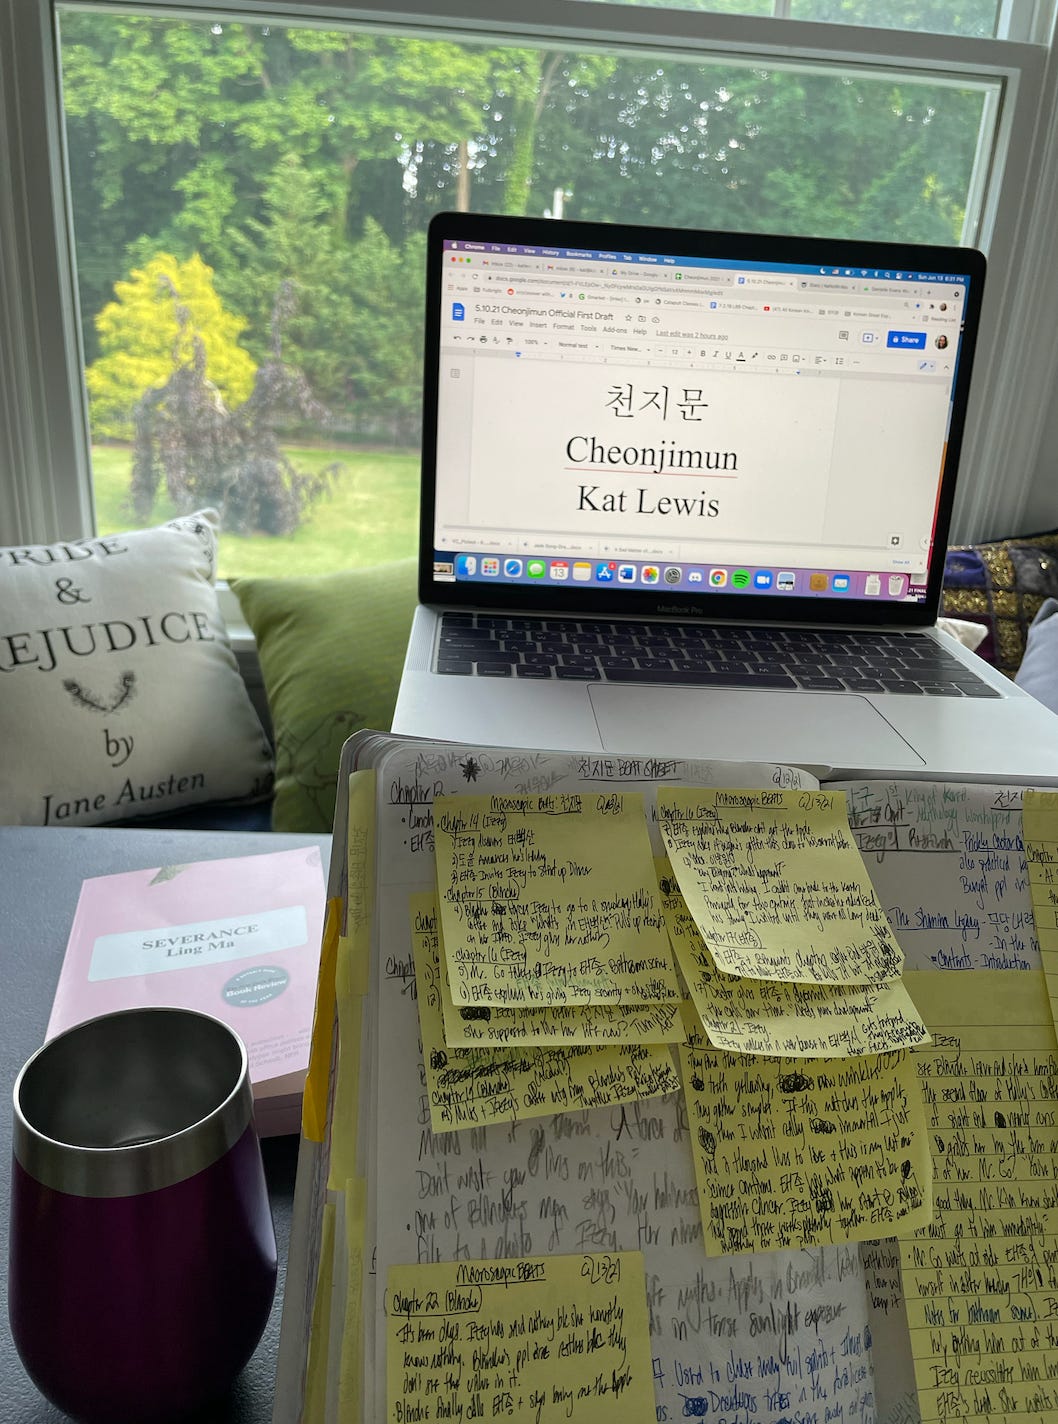 A photo of Kat's writing desk. Her laptop is opened to her novel manuscript titled, CheonJiMun. There is a composition notebook opened to a page of novel notes with many post-it notes stuck to it. The novel, Severance by Ling Ma, is also visible on the desk.